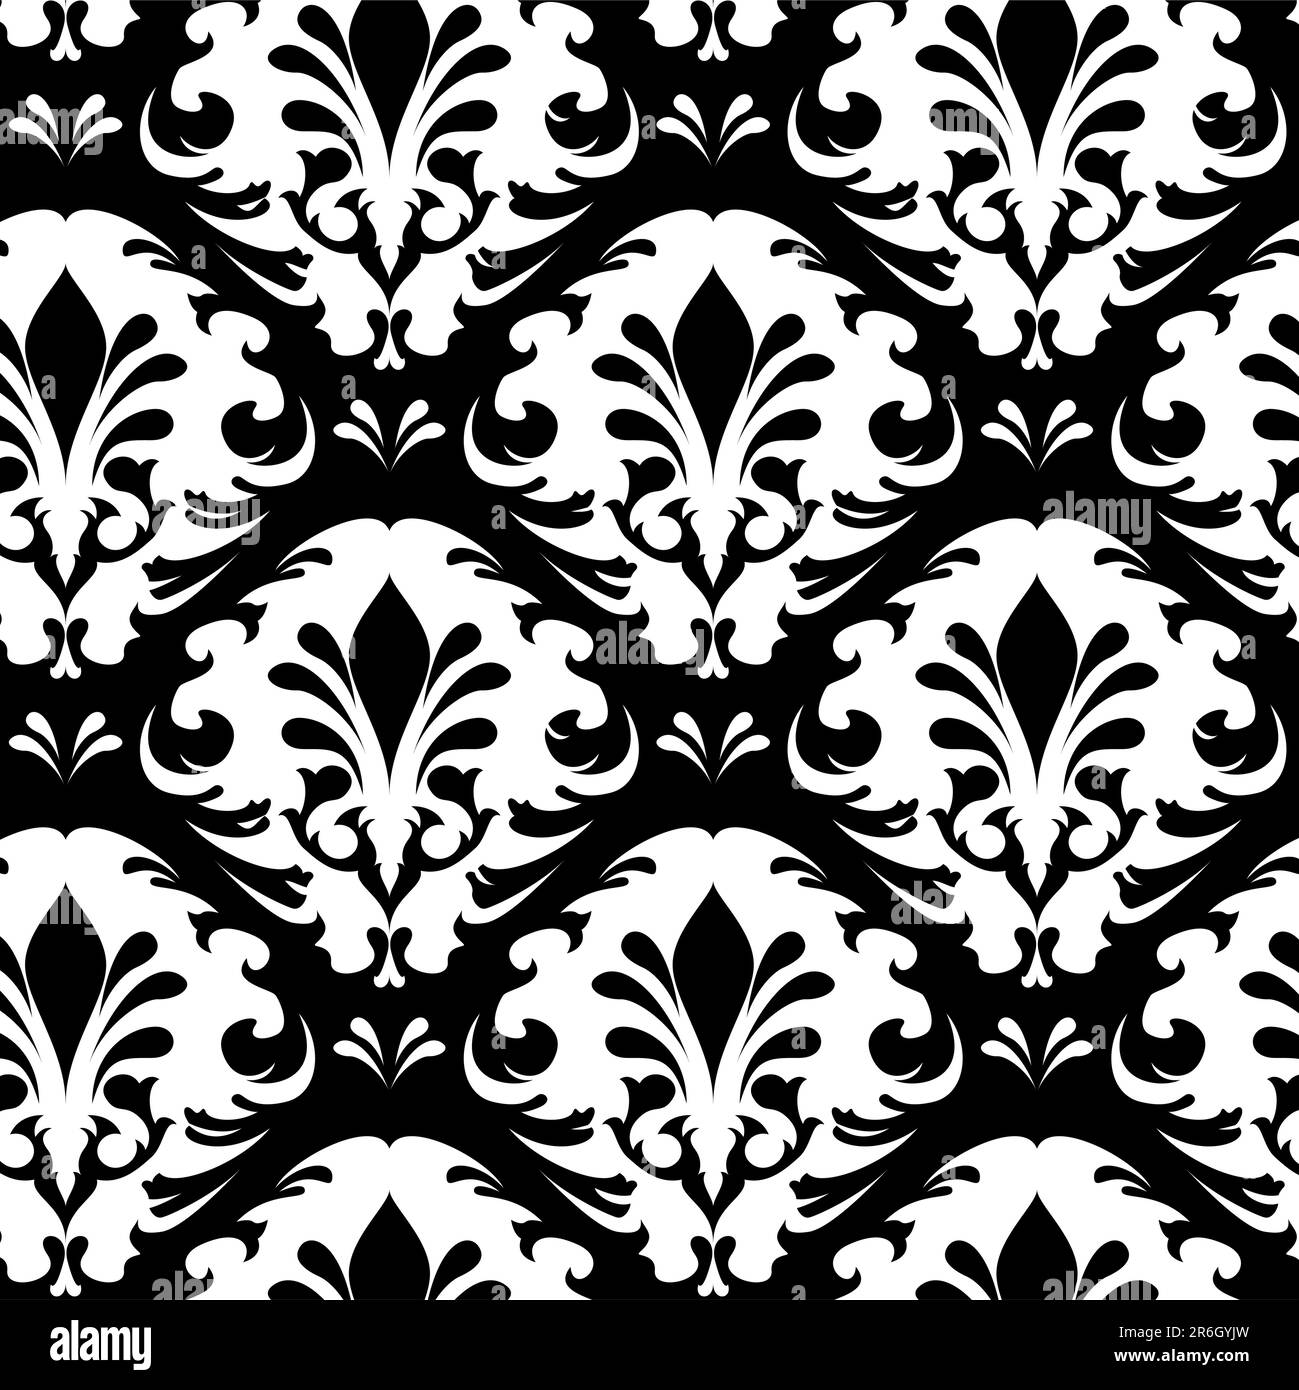 Illustration of a black and white vintage floral pattern Stock Vector